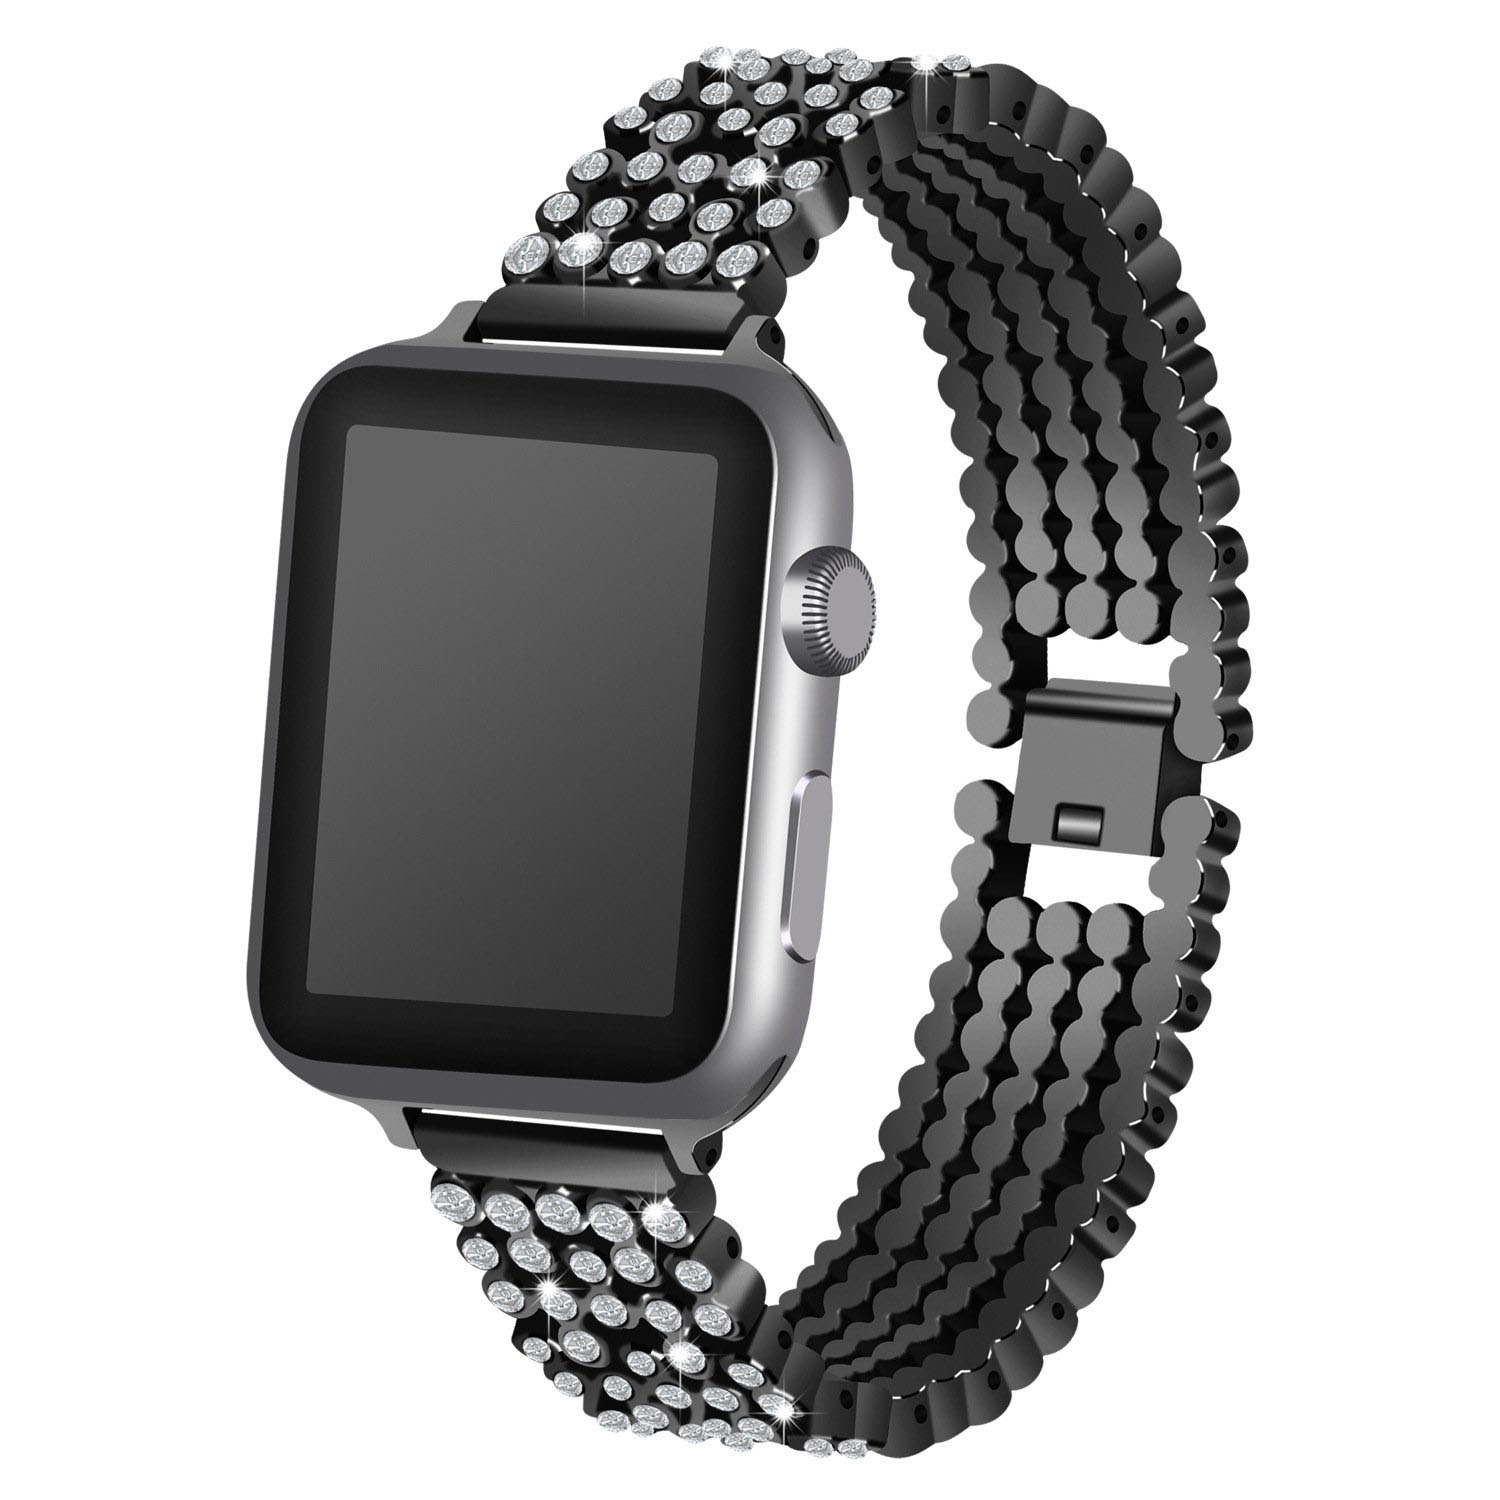 A.m16.mb Main Black StrapsCo Alloy Metal Link Watch Bracelet Band With Rhinestones For Apple Watch Series 1234 38mm 40mm 42mm 44mm